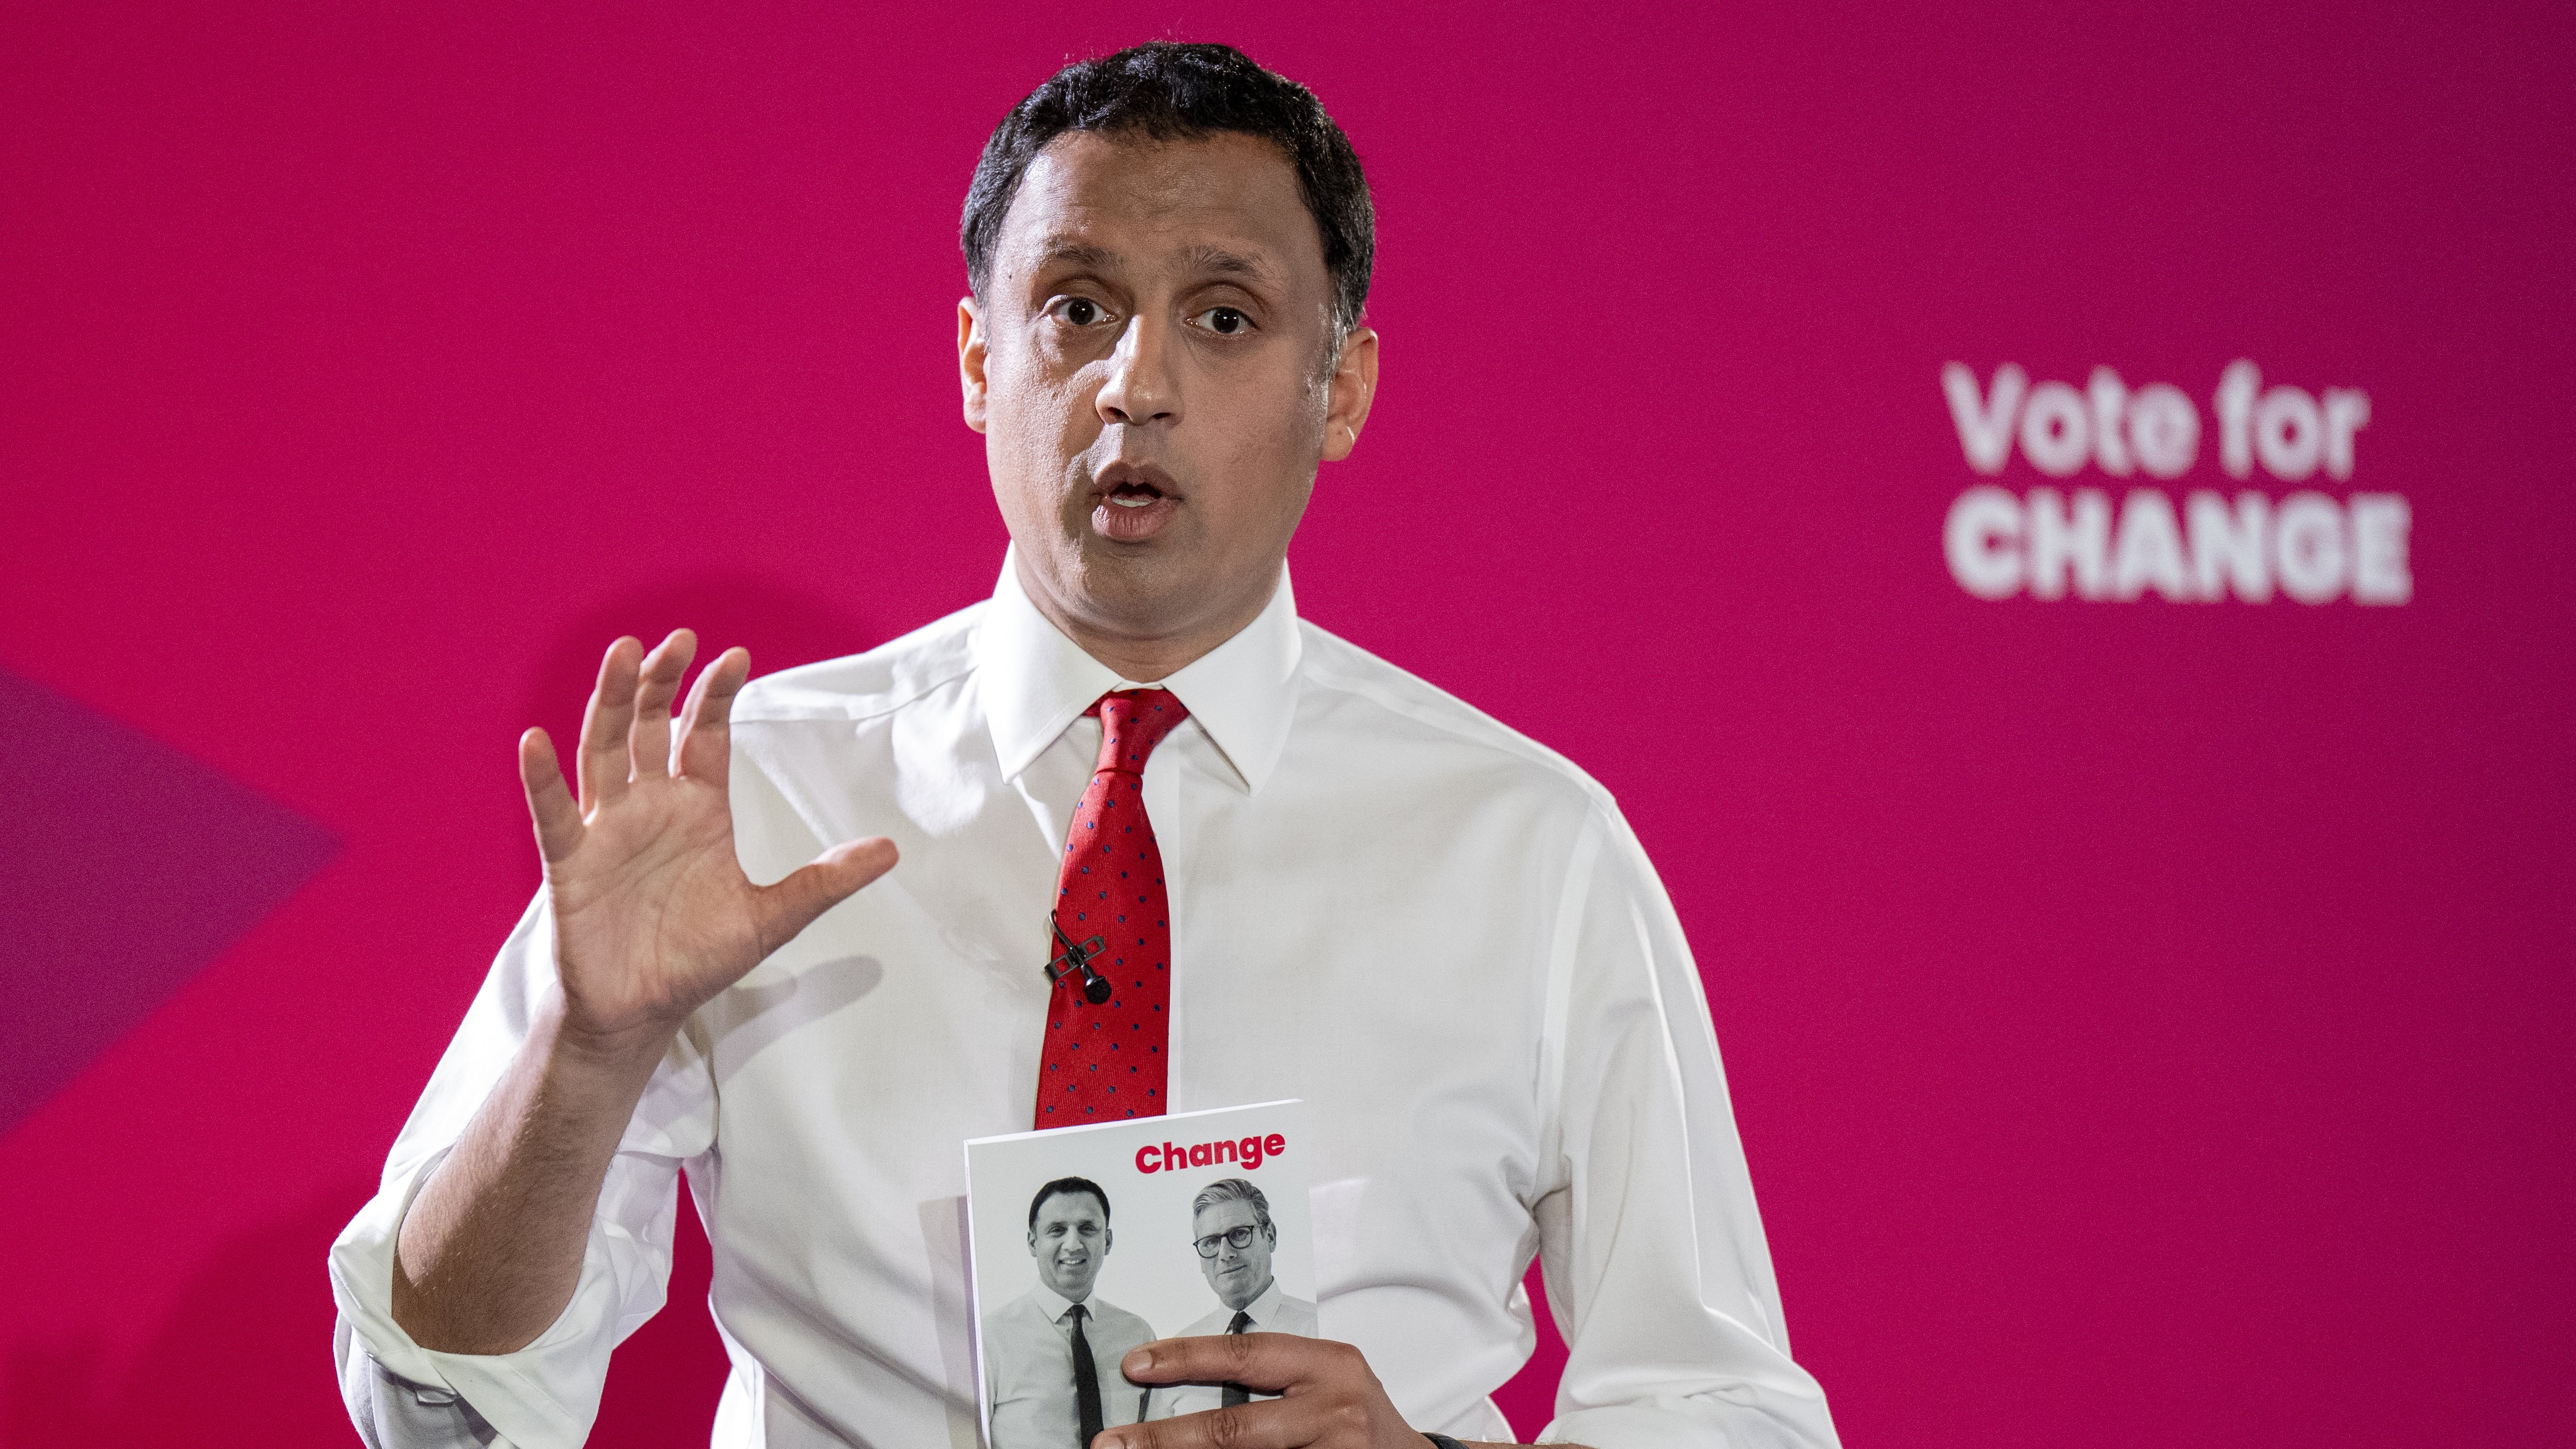 The Scottish Labour leader has made his final plea to voters